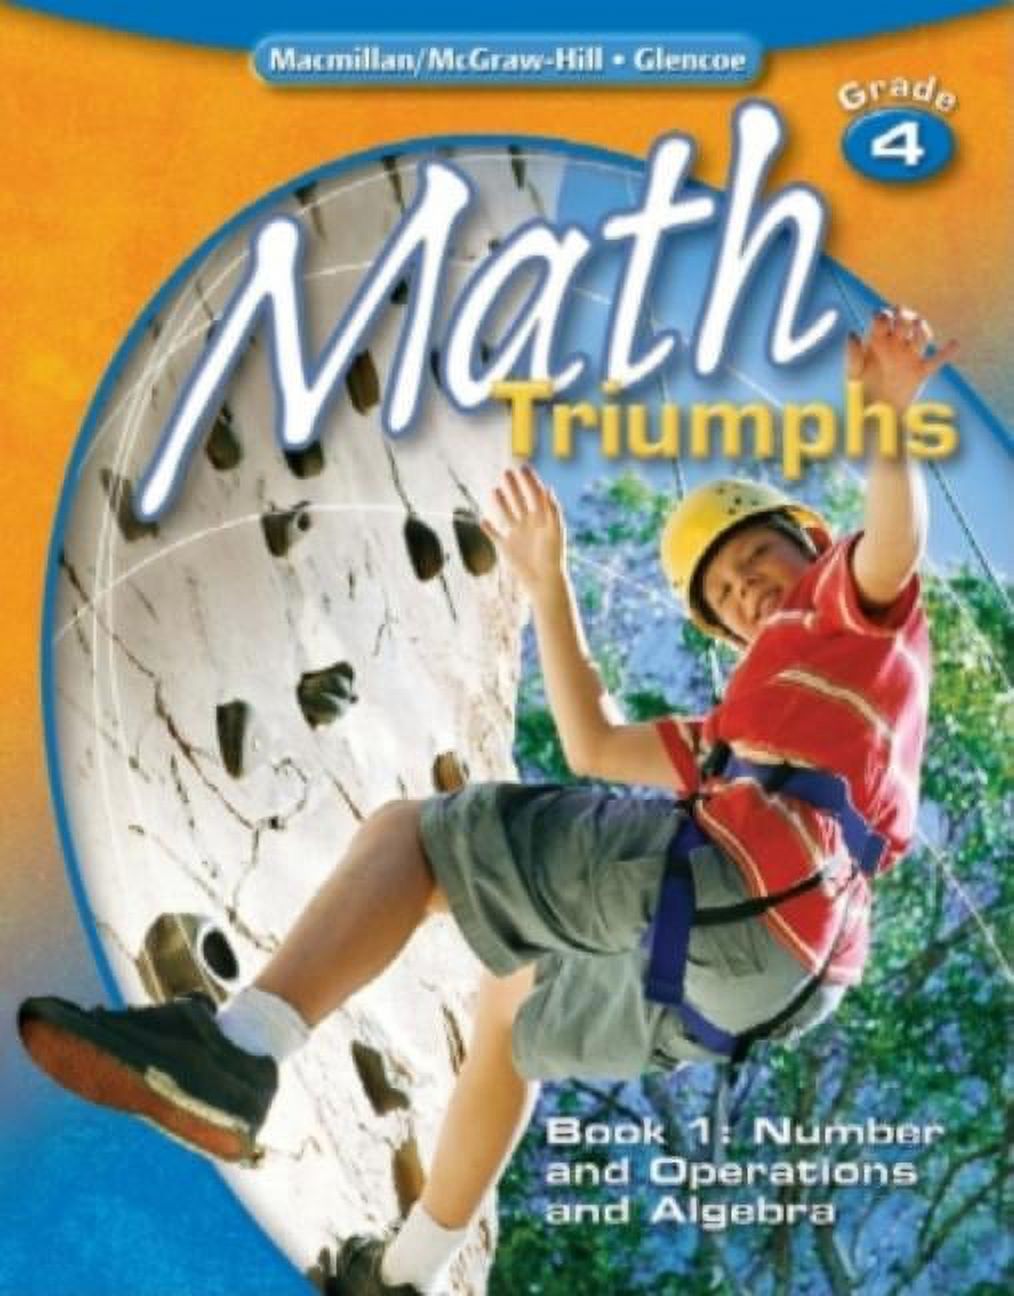 Triumphs,　1:　Algebra　Operations　Number　4,　and　Book　and　Math　Grade